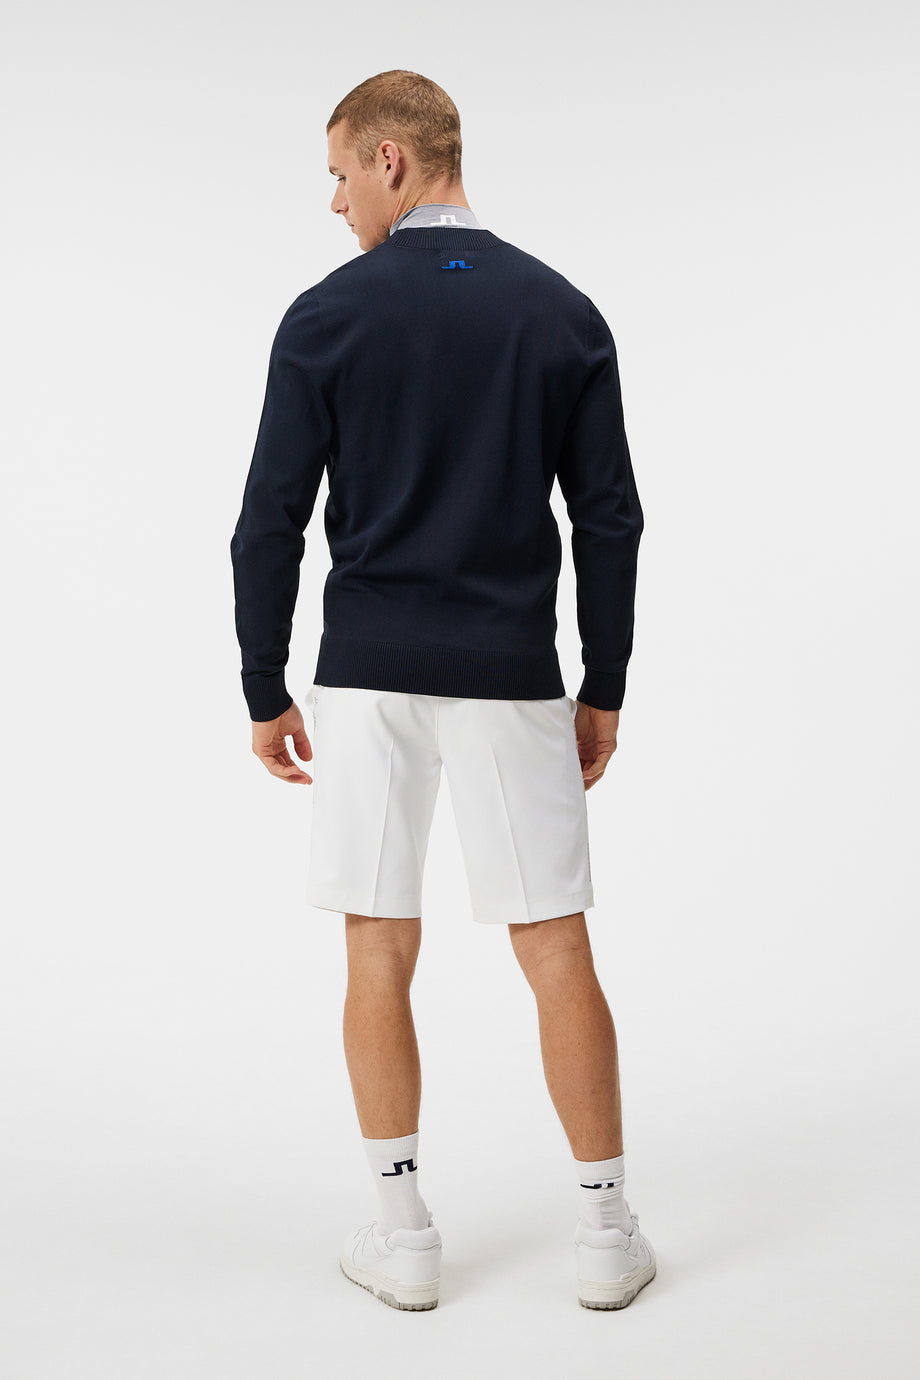 Gus Knitted Sweater / JL Navy – J.Lindeberg